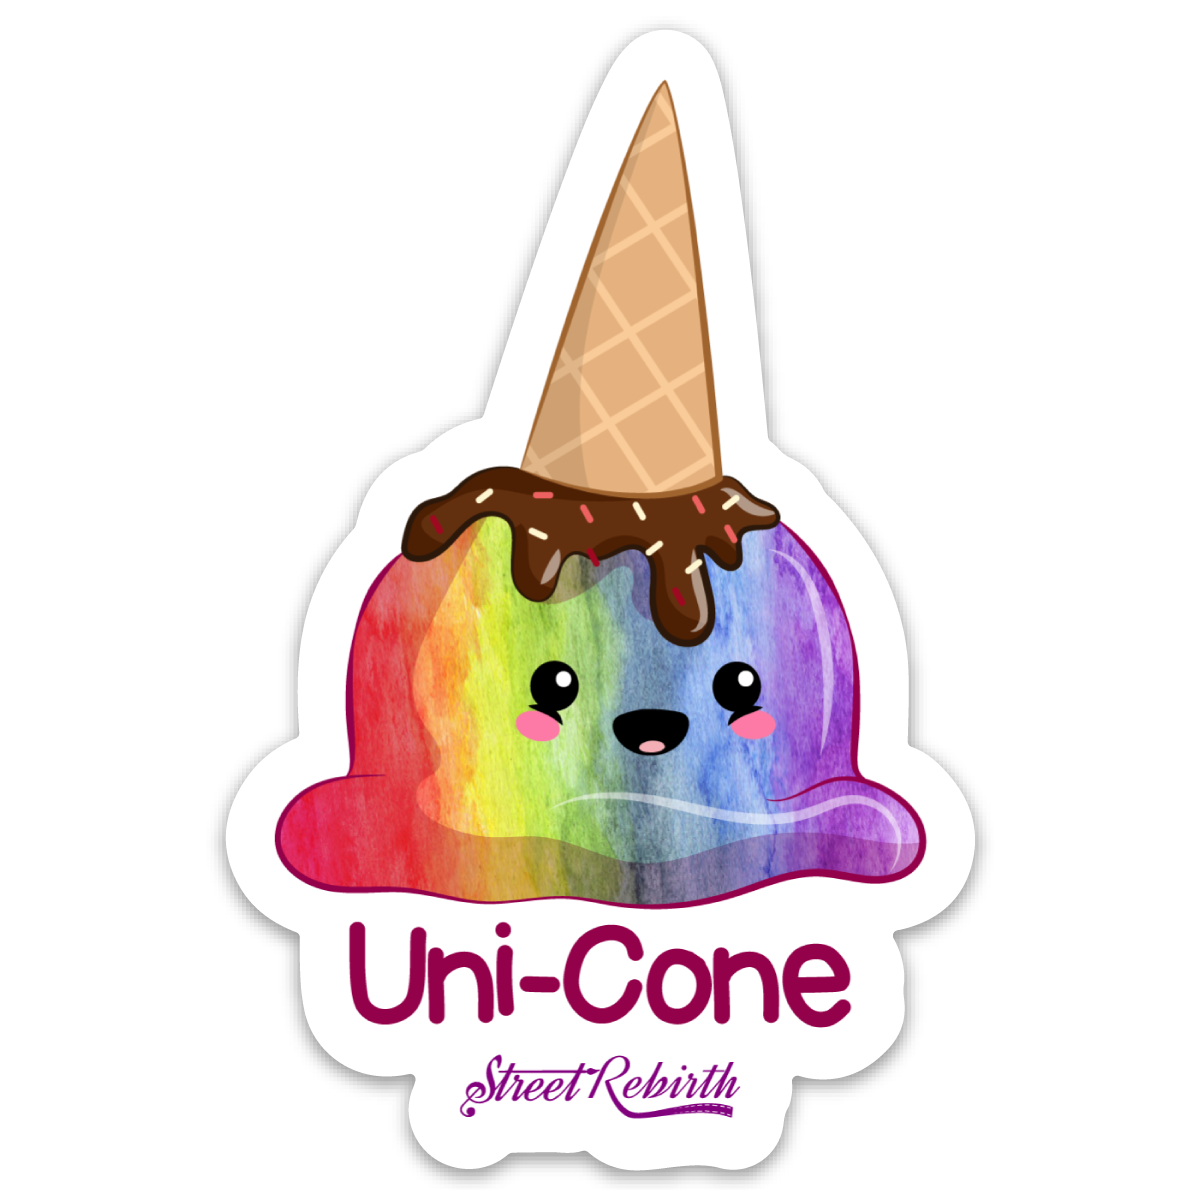 UNI-CONE STICKER – ONE 4 INCH WATER PROOF VINYL STICKER – FOR HYDRO FLASK, SKATEBOARD, LAPTOP, PLANNER, CAR, COLLECTING, GIFTING